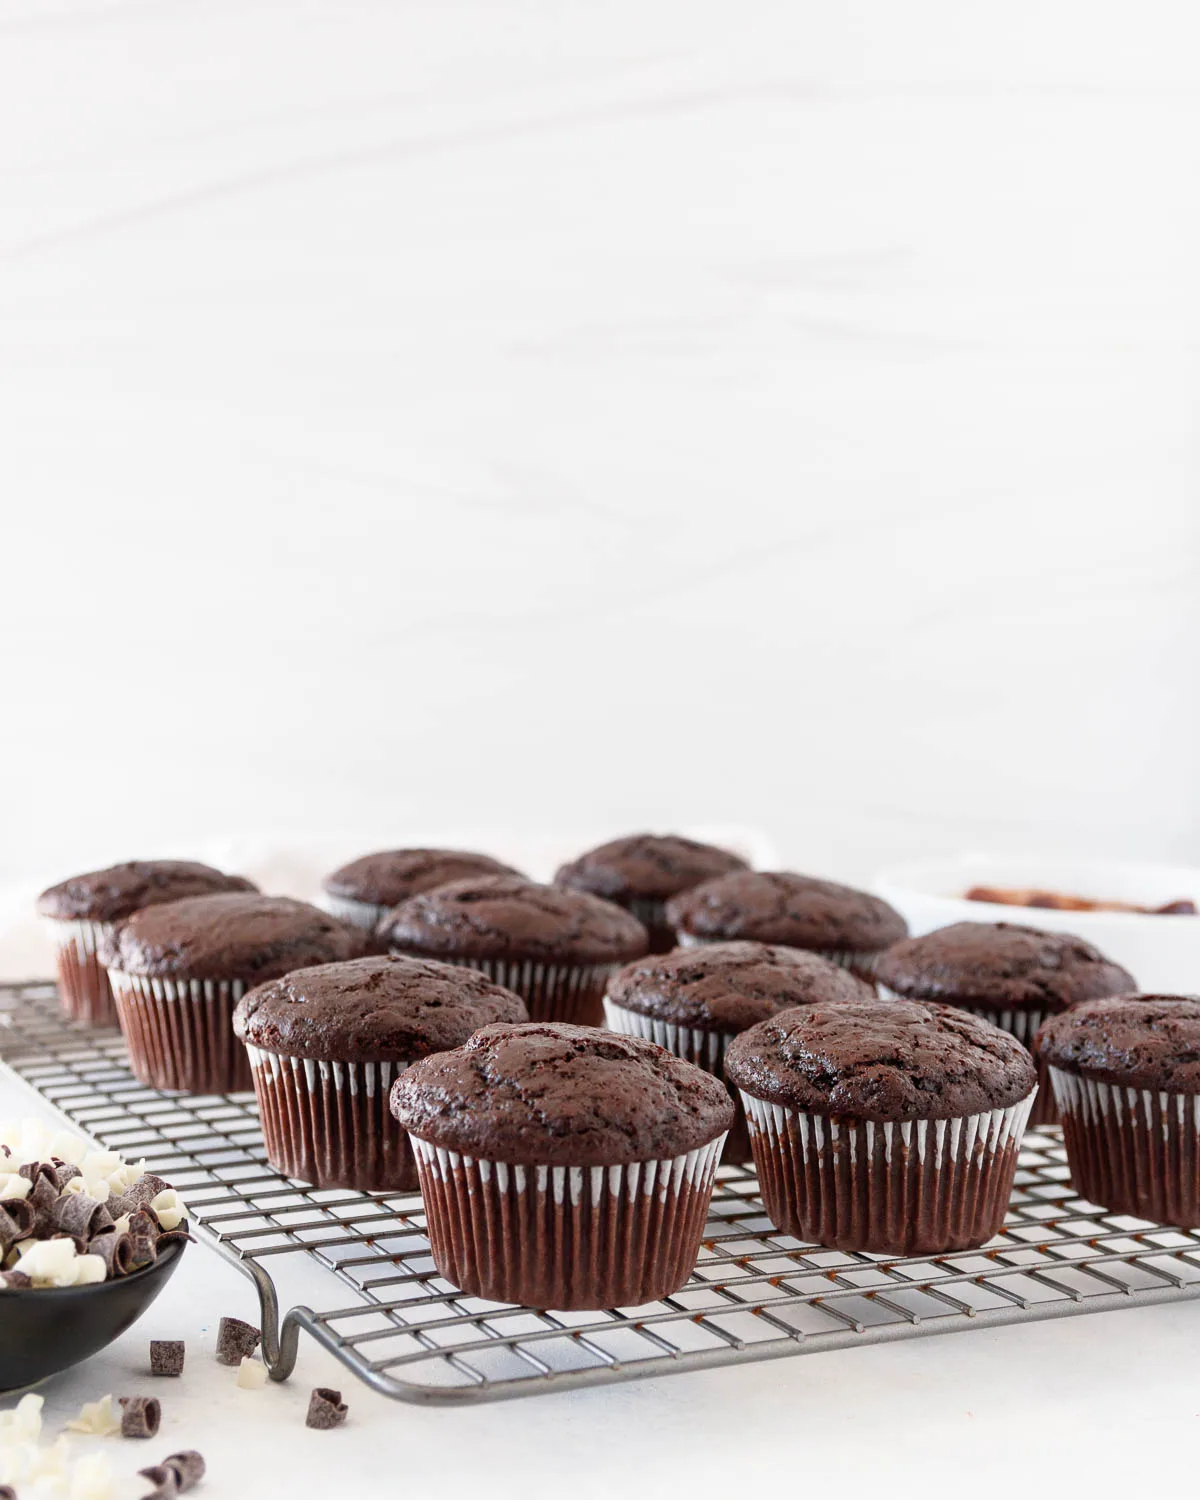 baked chocolate cupcakes on a cooling rack